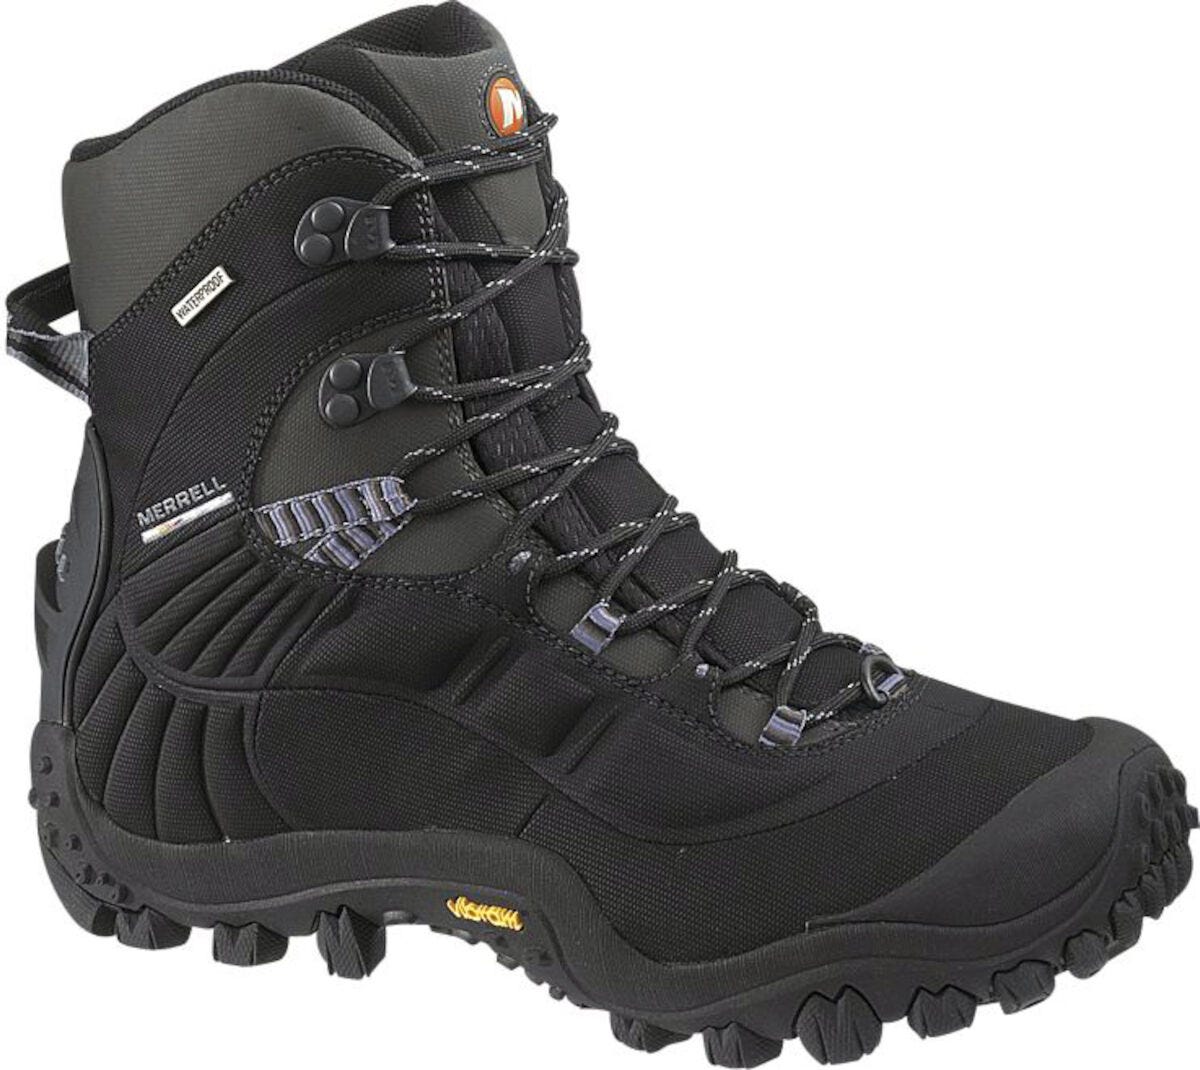 merrell all weather boots